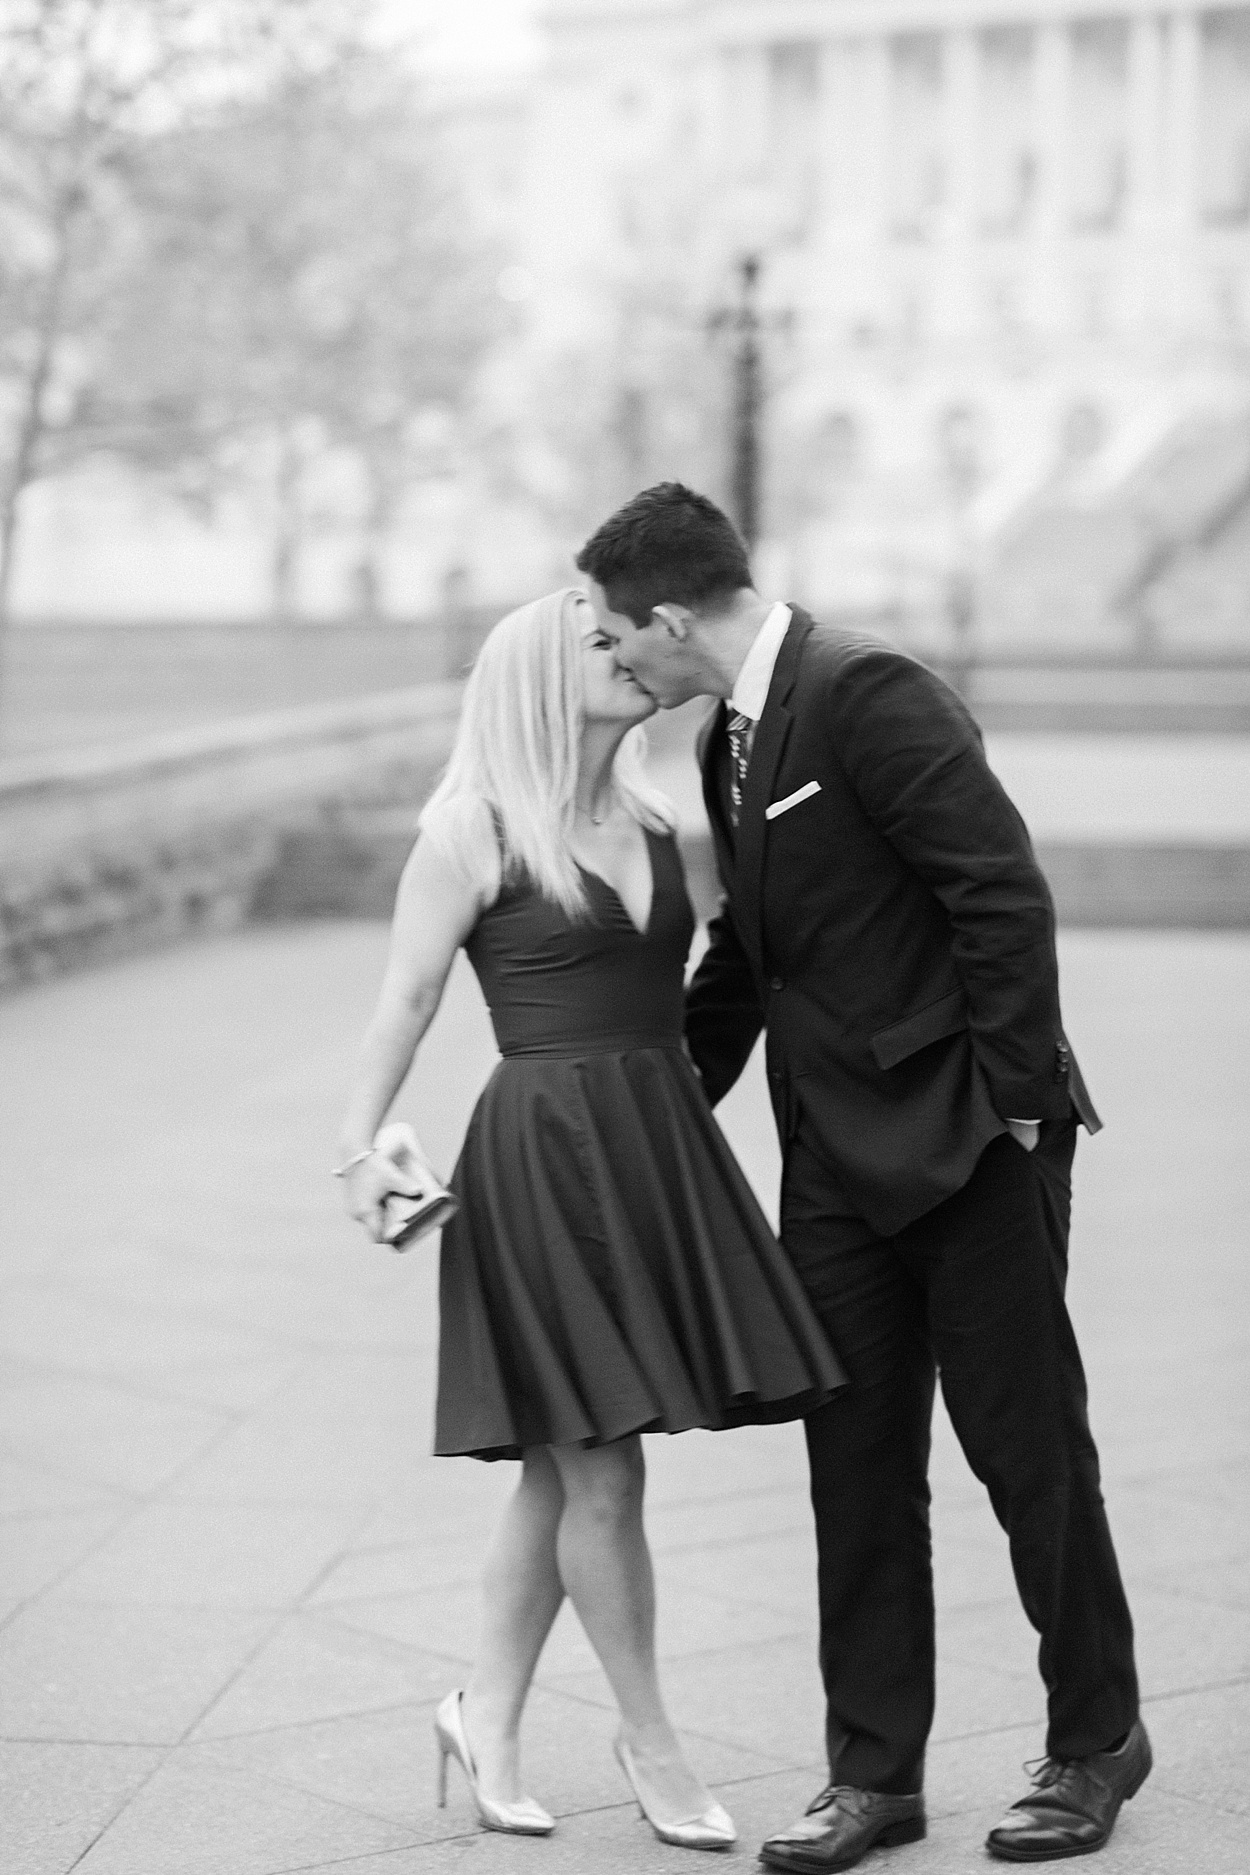 Capitol Hill proposal | Abby Grace Photography